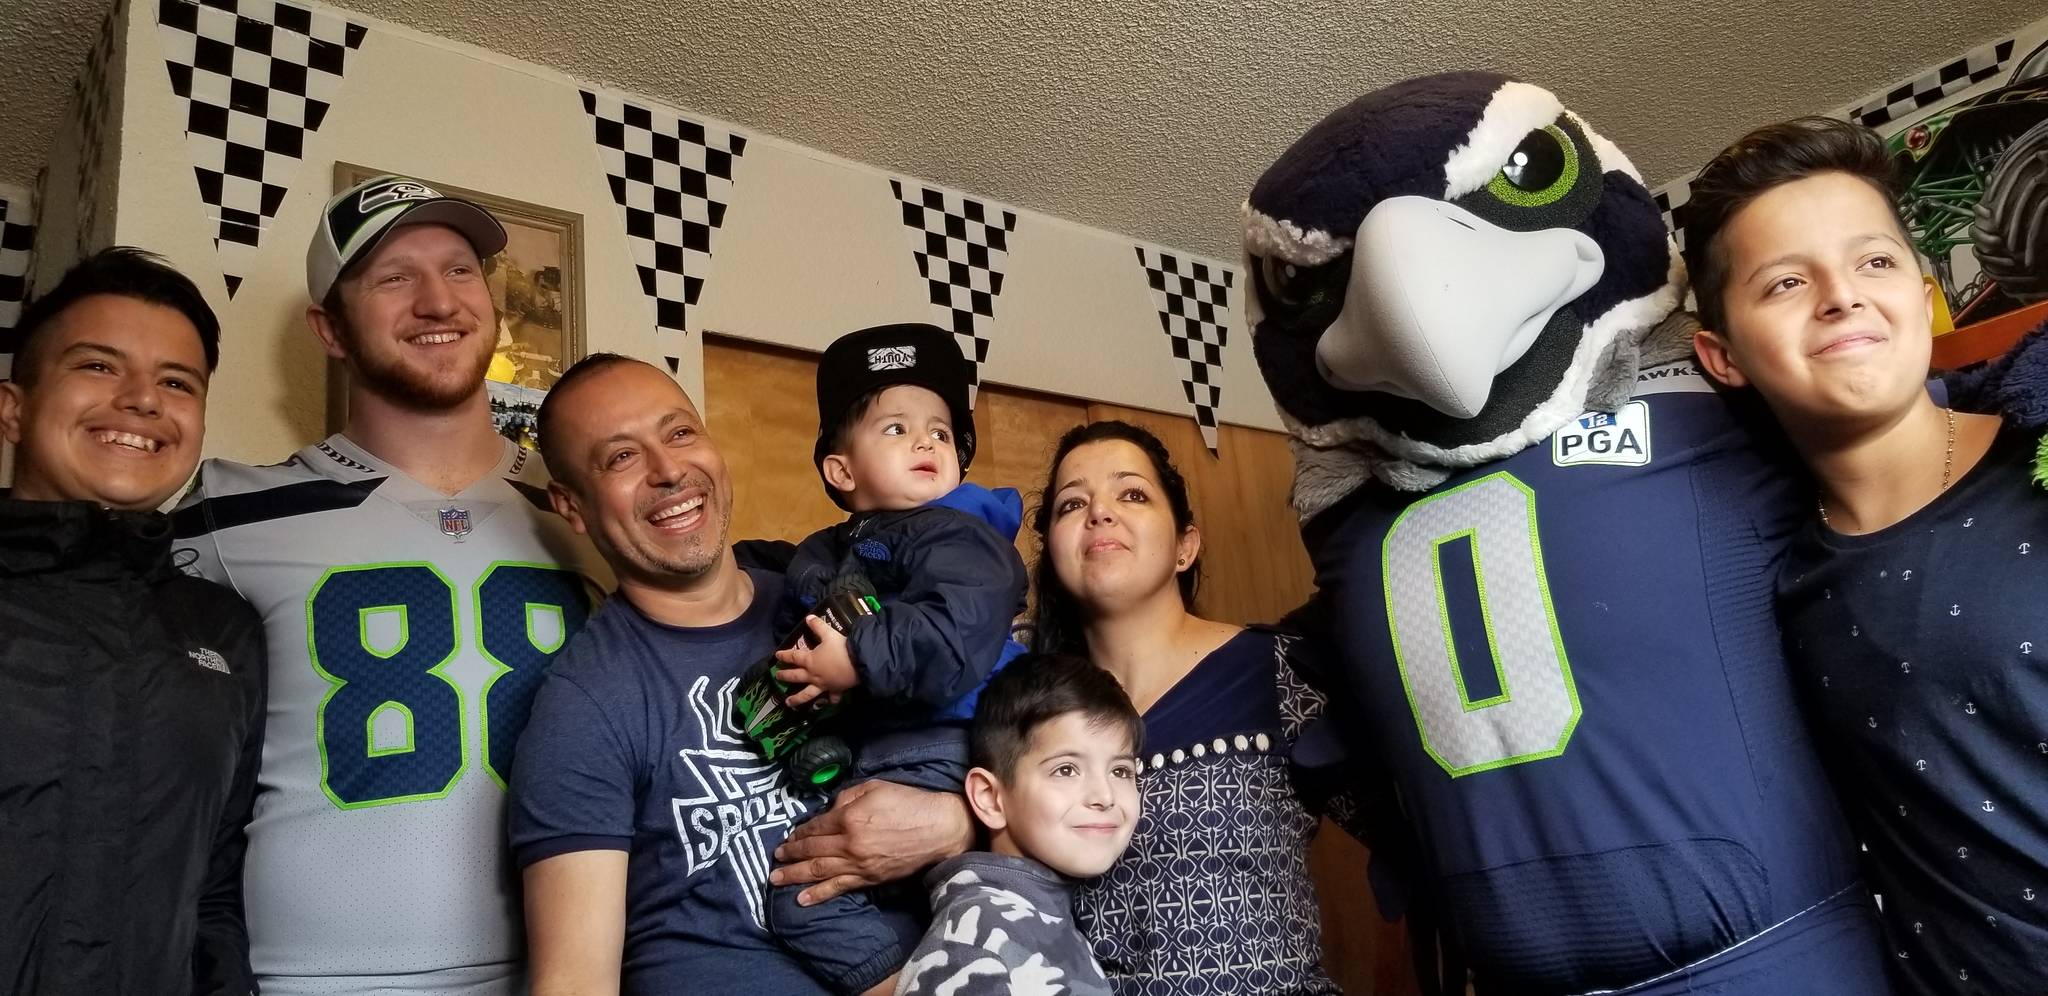 Seahawks tight end Will Dissly and Blitz made a surprise visit to the Magana family at their Kent apartment Thursday for a bedroom makeover reveal with five of their young sons. The shared bedroom received a new Monster Jam-themed look, complete with bedding, décor and toys. COURTESY PHOTO